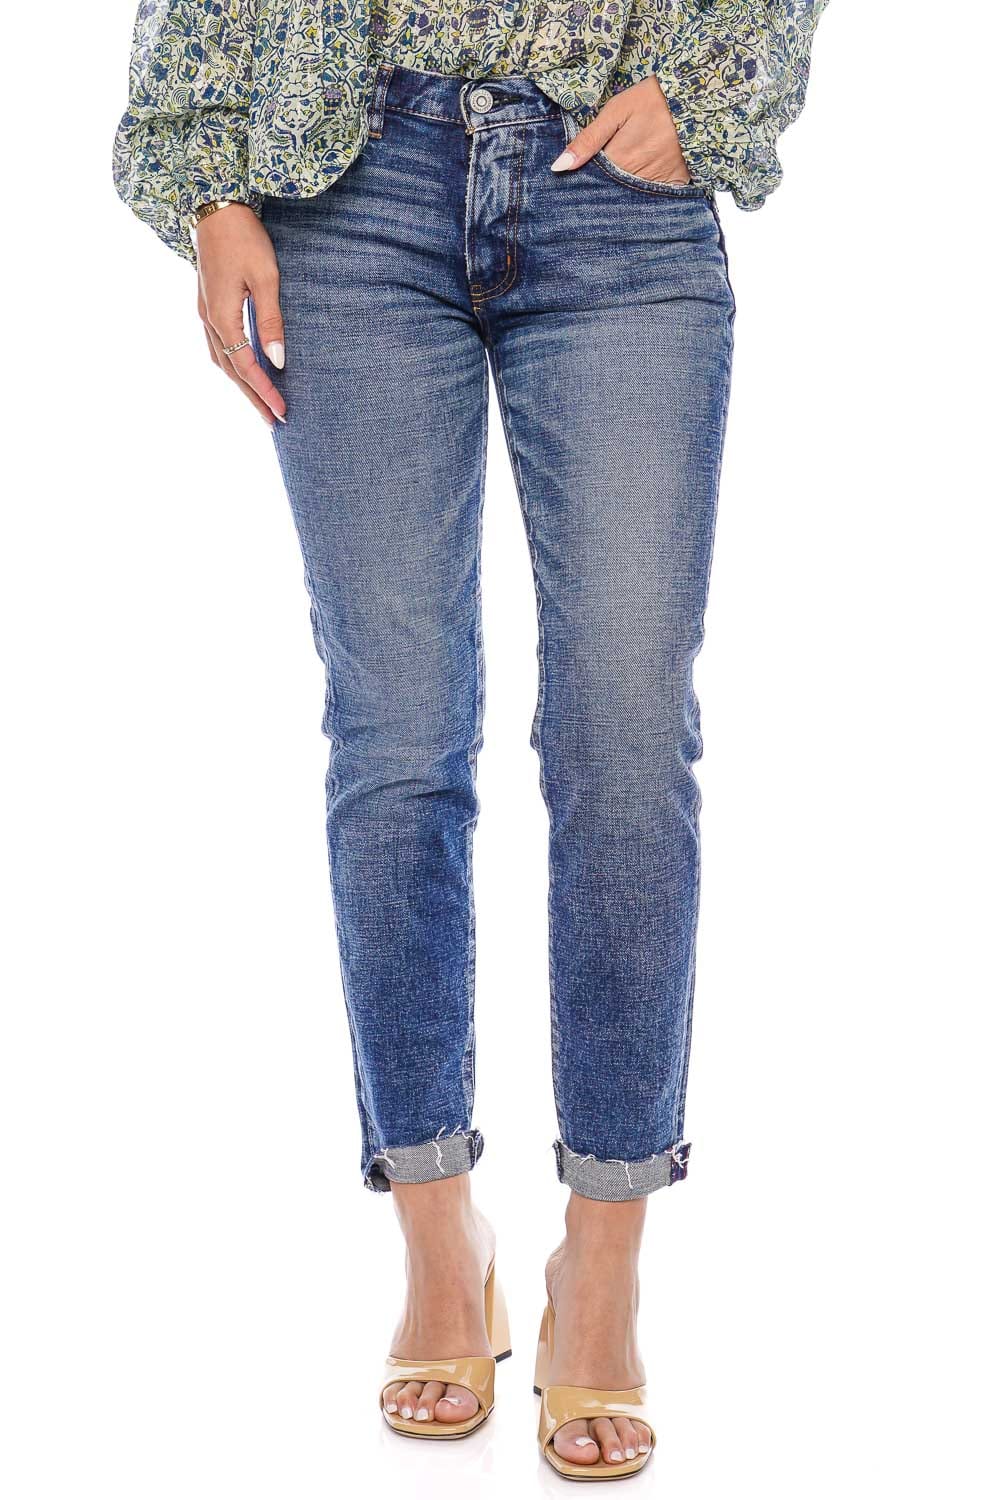 MOUSSY VINTAGE Caledonia Rolled Cuff Skinny Jeans